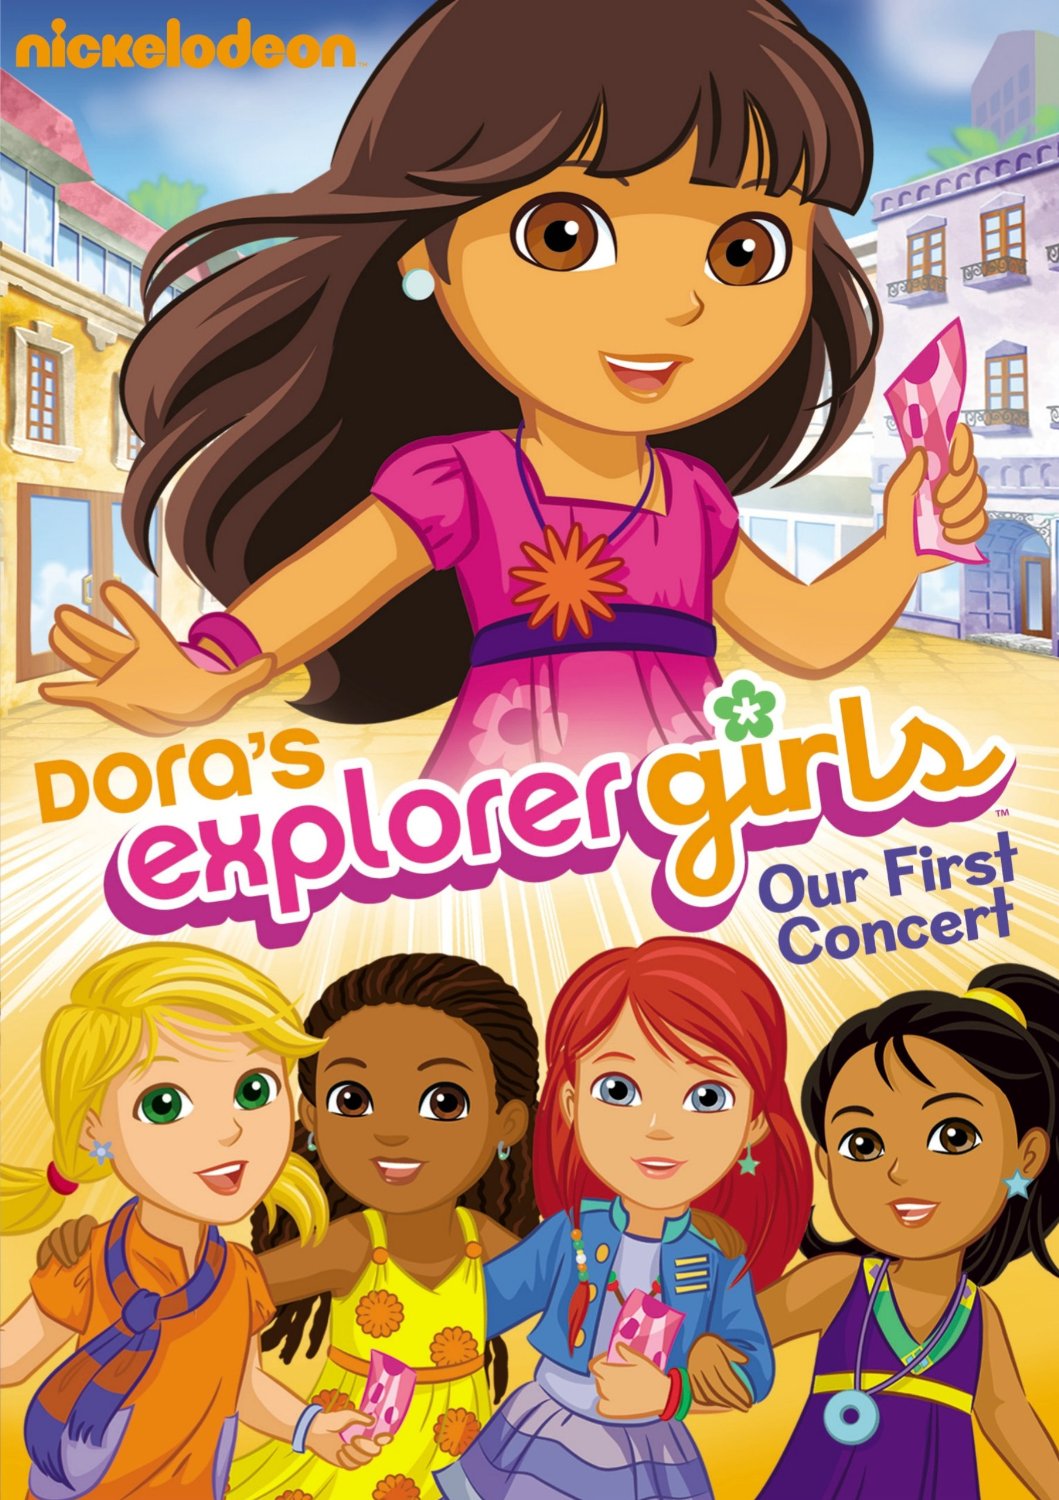 Dora and Friends: Into the City! videography.